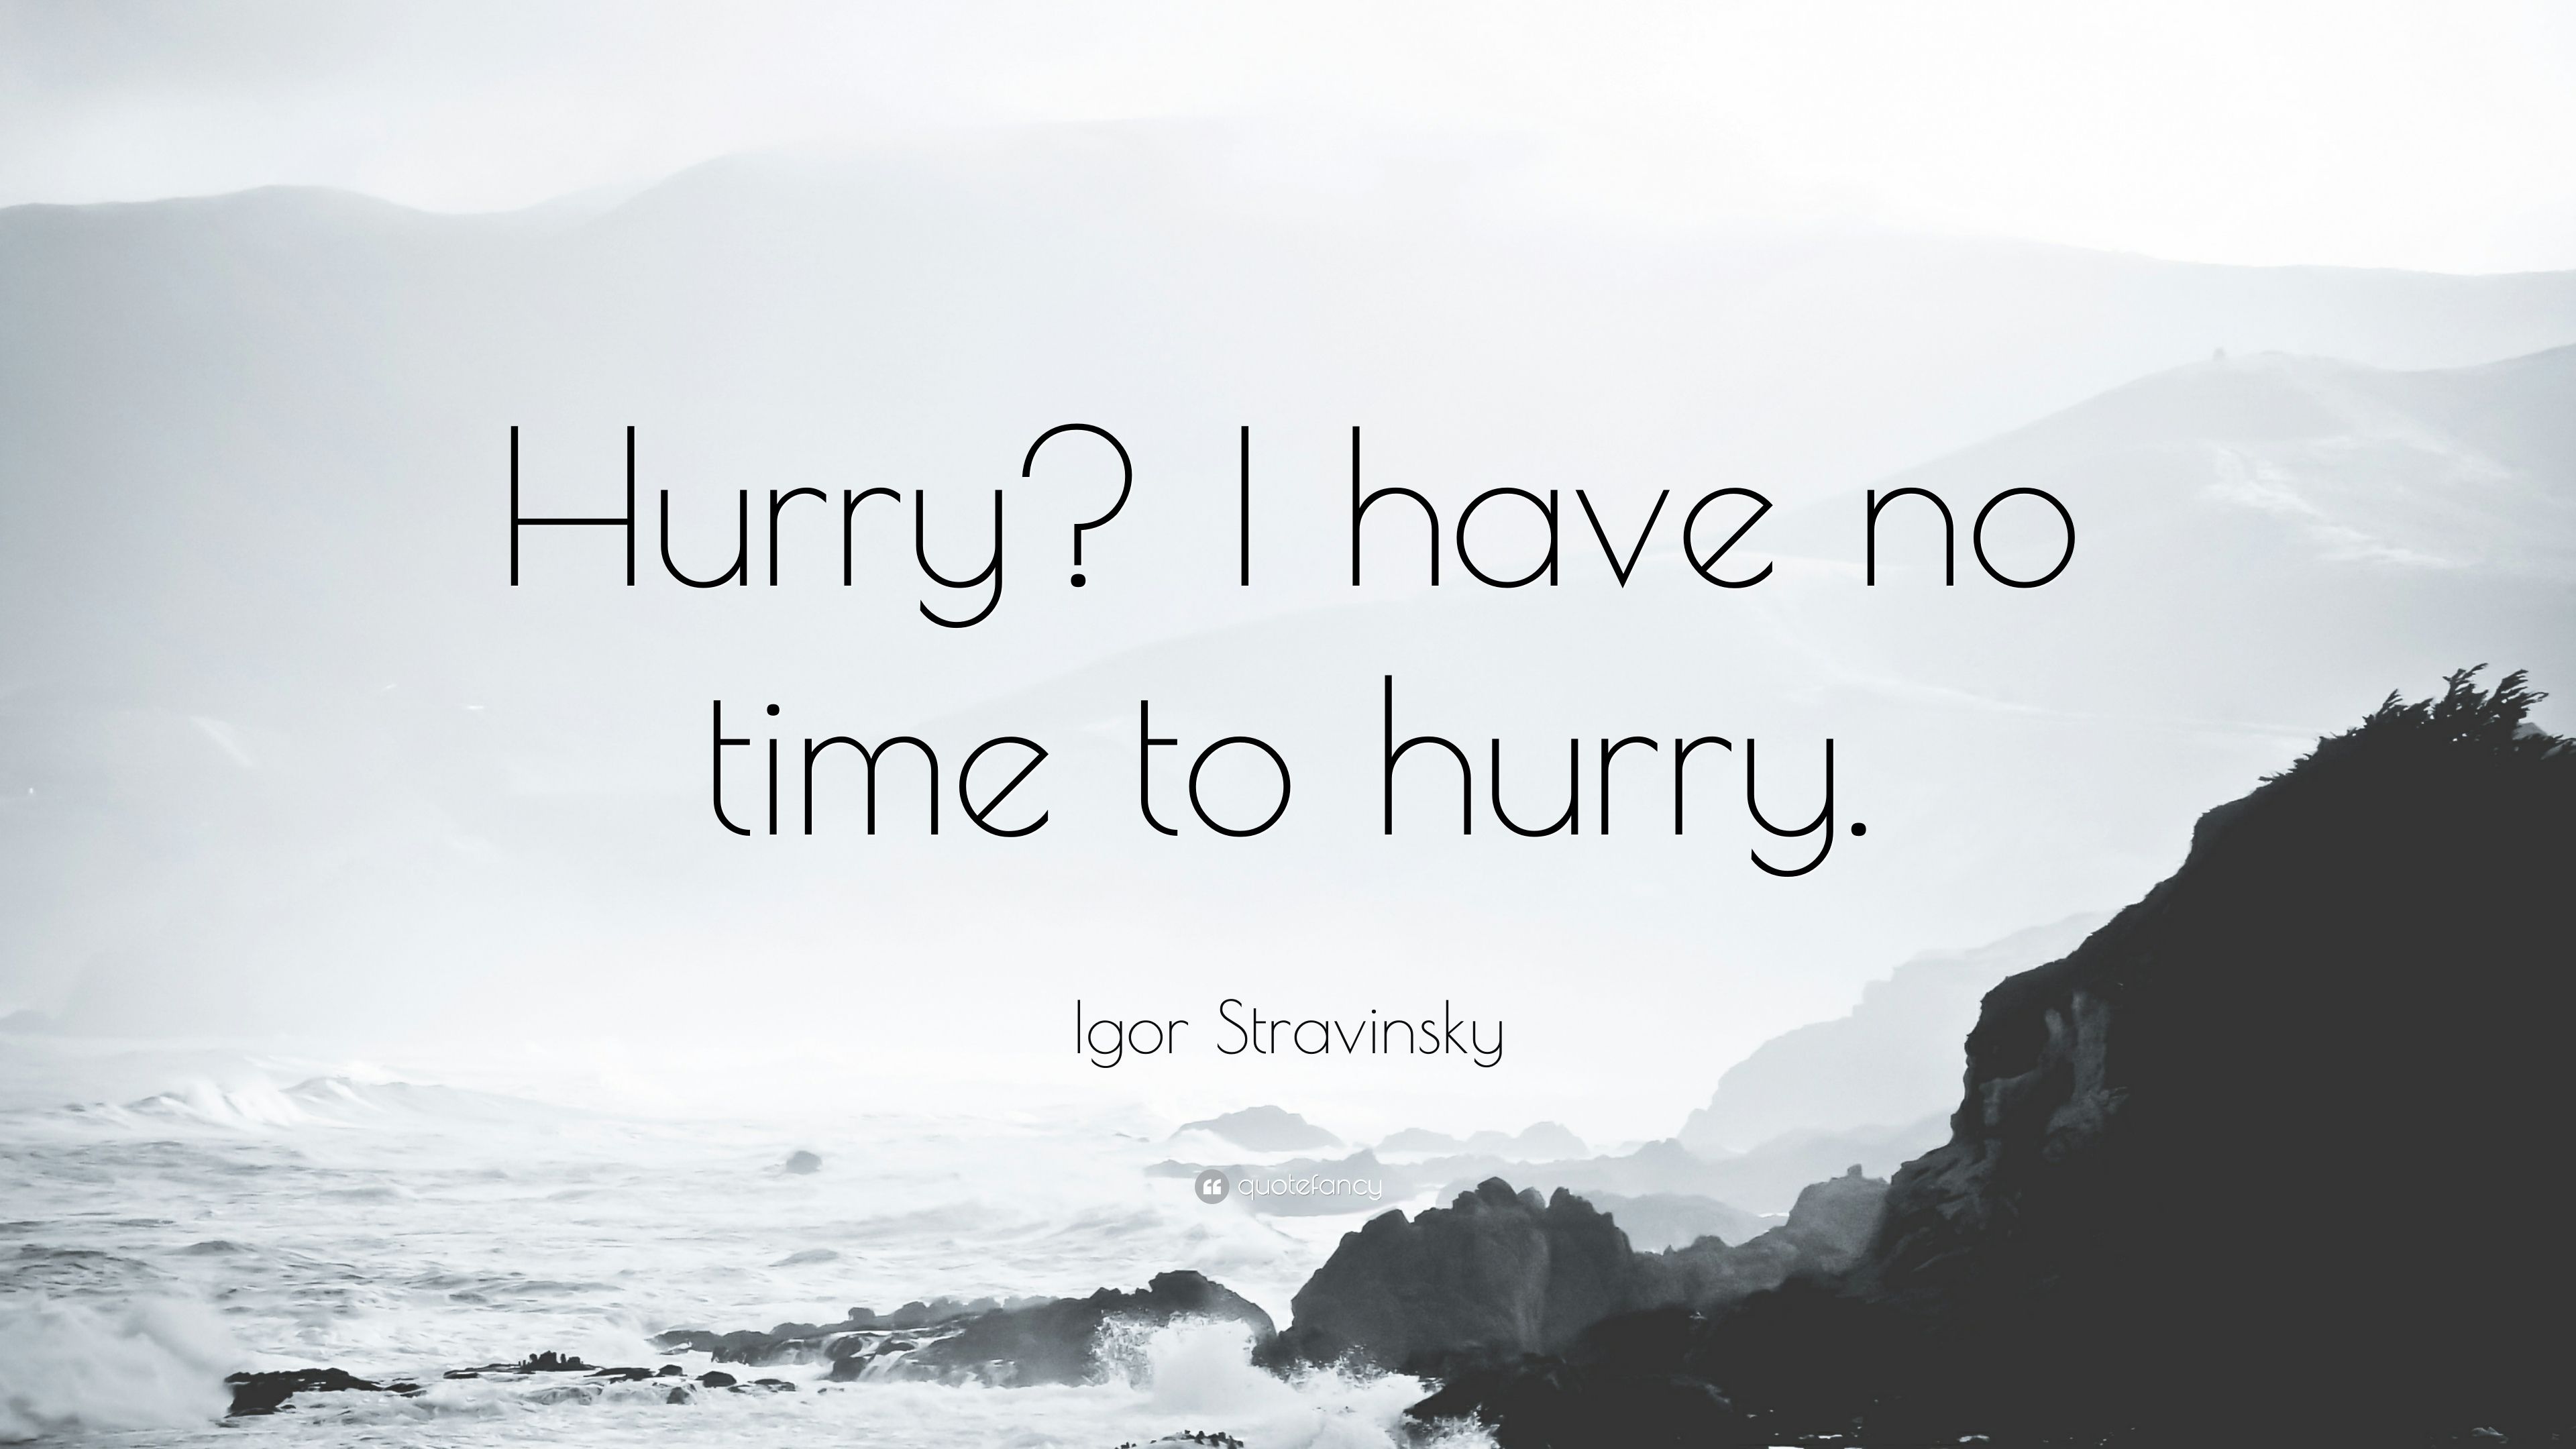 Igor Stravinsky Quote: “Hurry? I have no time to hurry.” 9